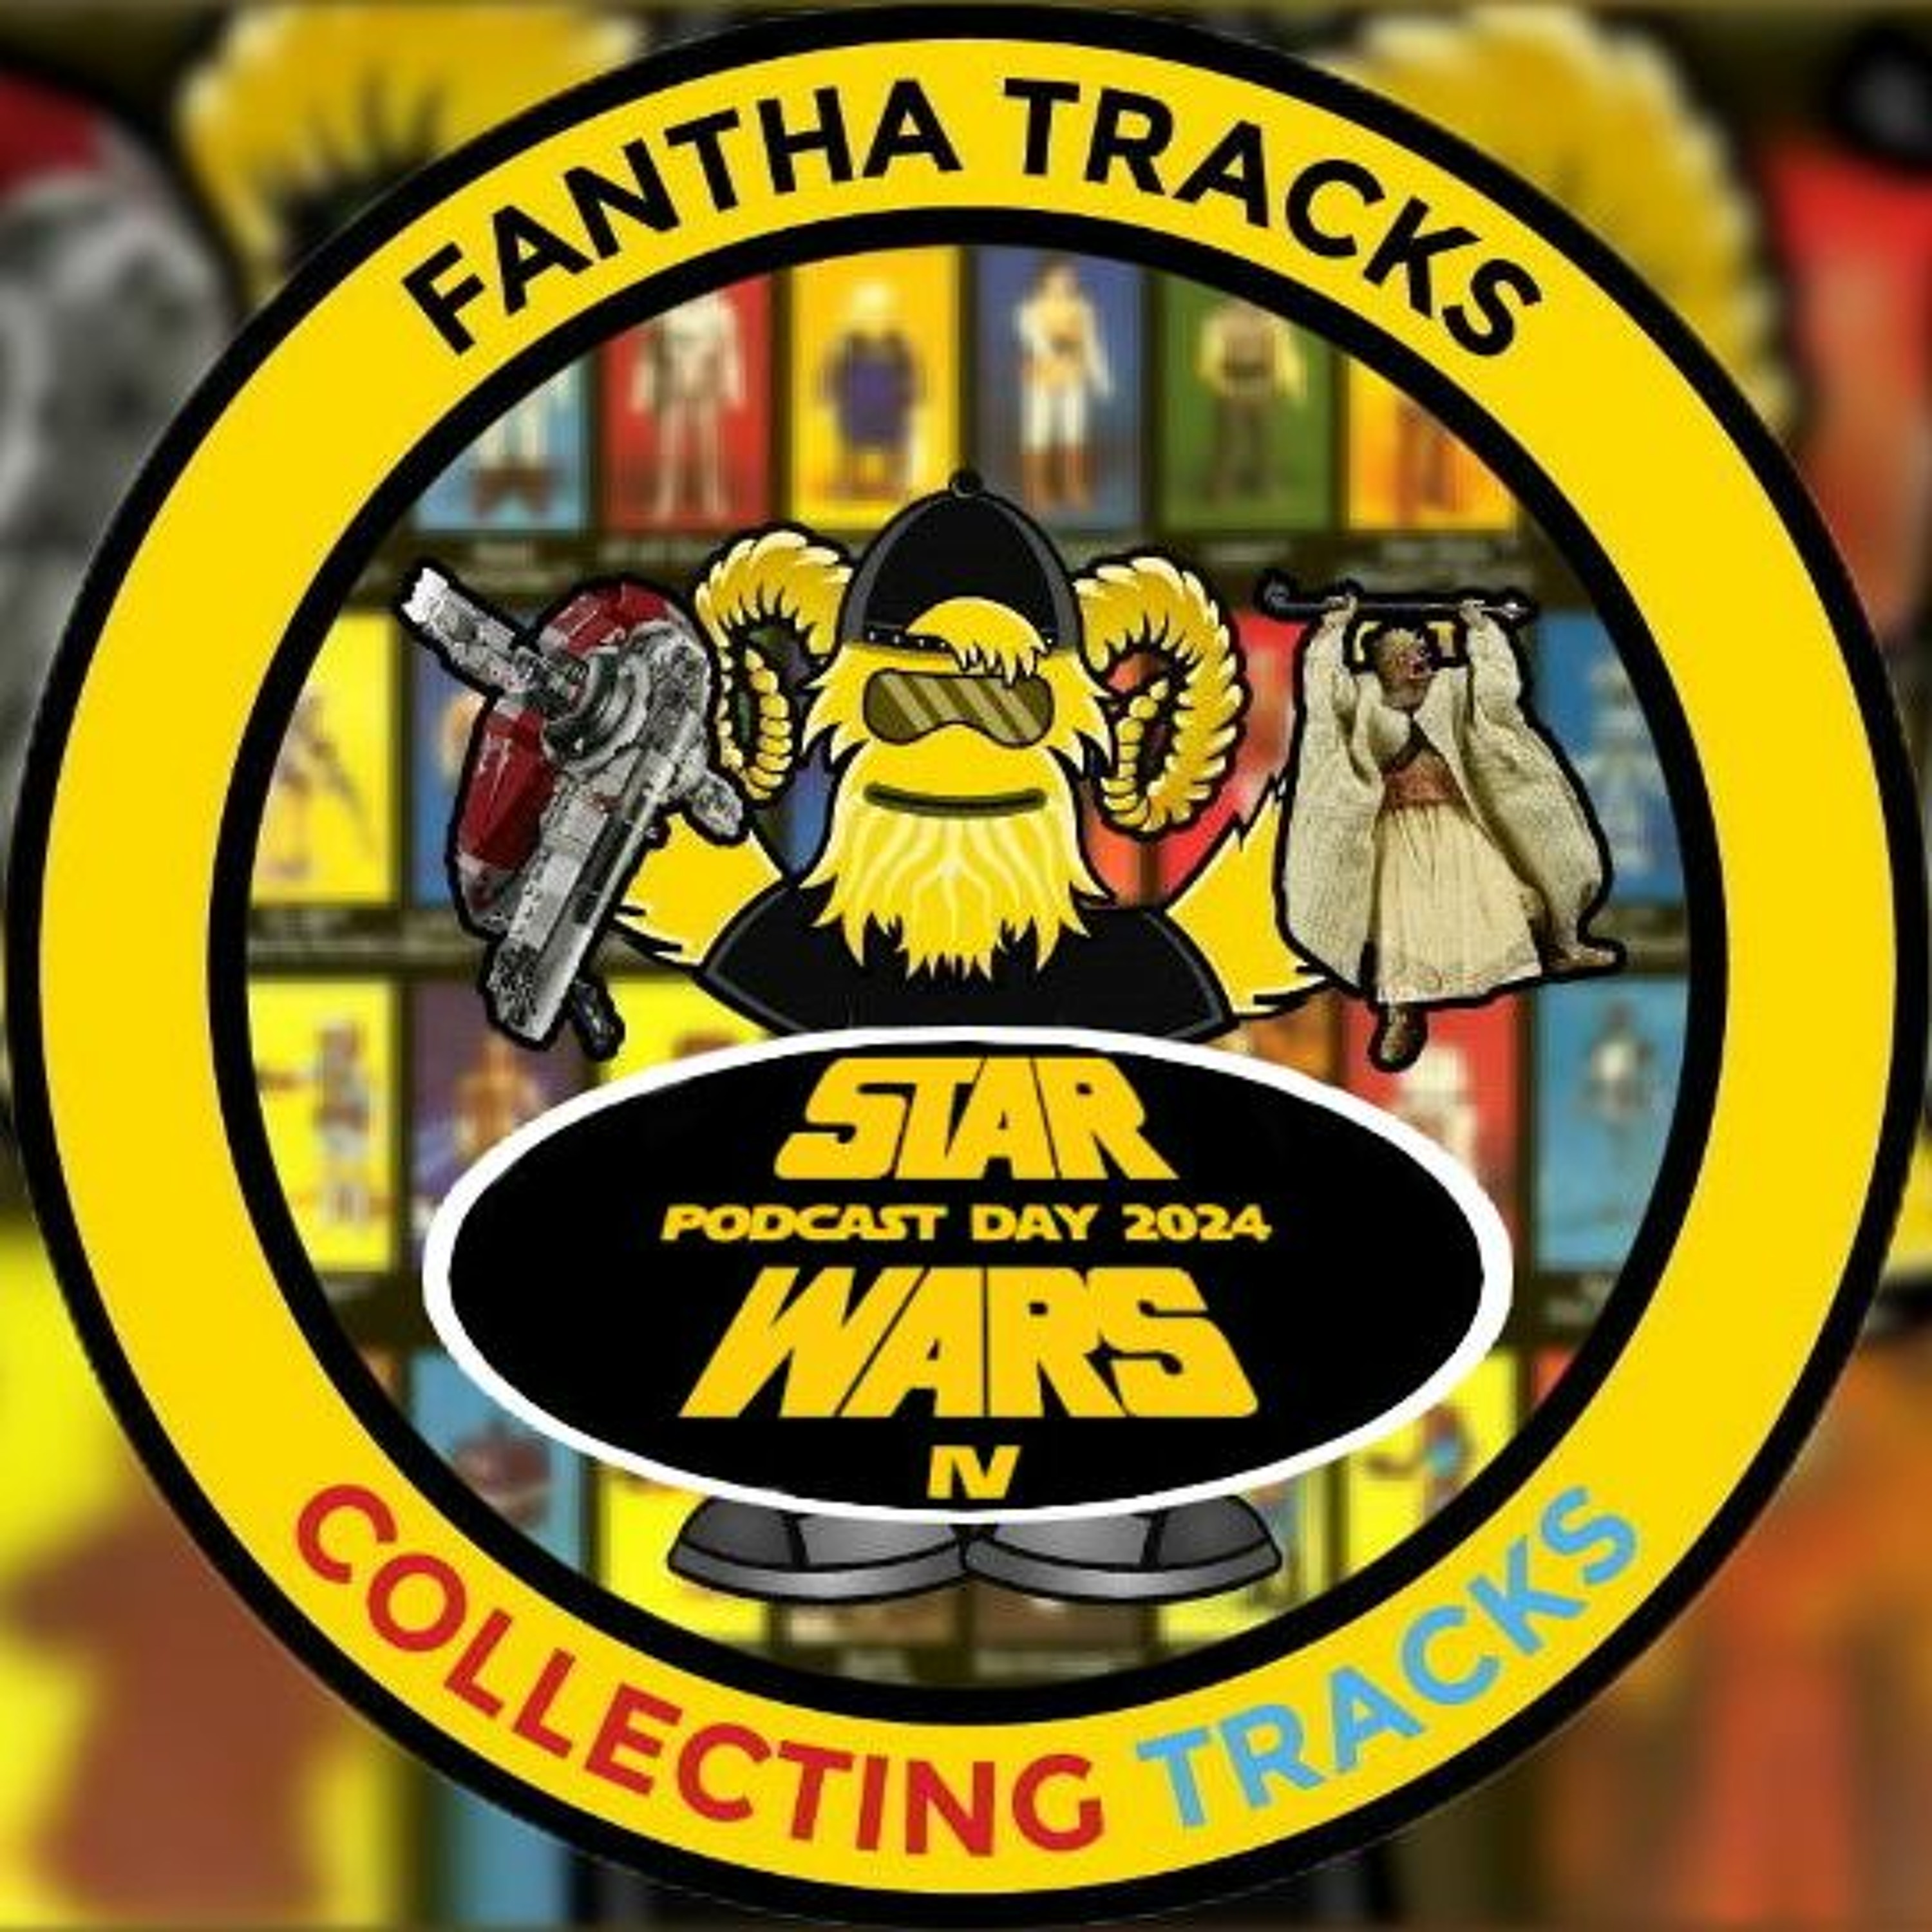 Collecting Tracks Limited Edition: Collecting do’s and don’ts - Star Wars Podcast Day 2024